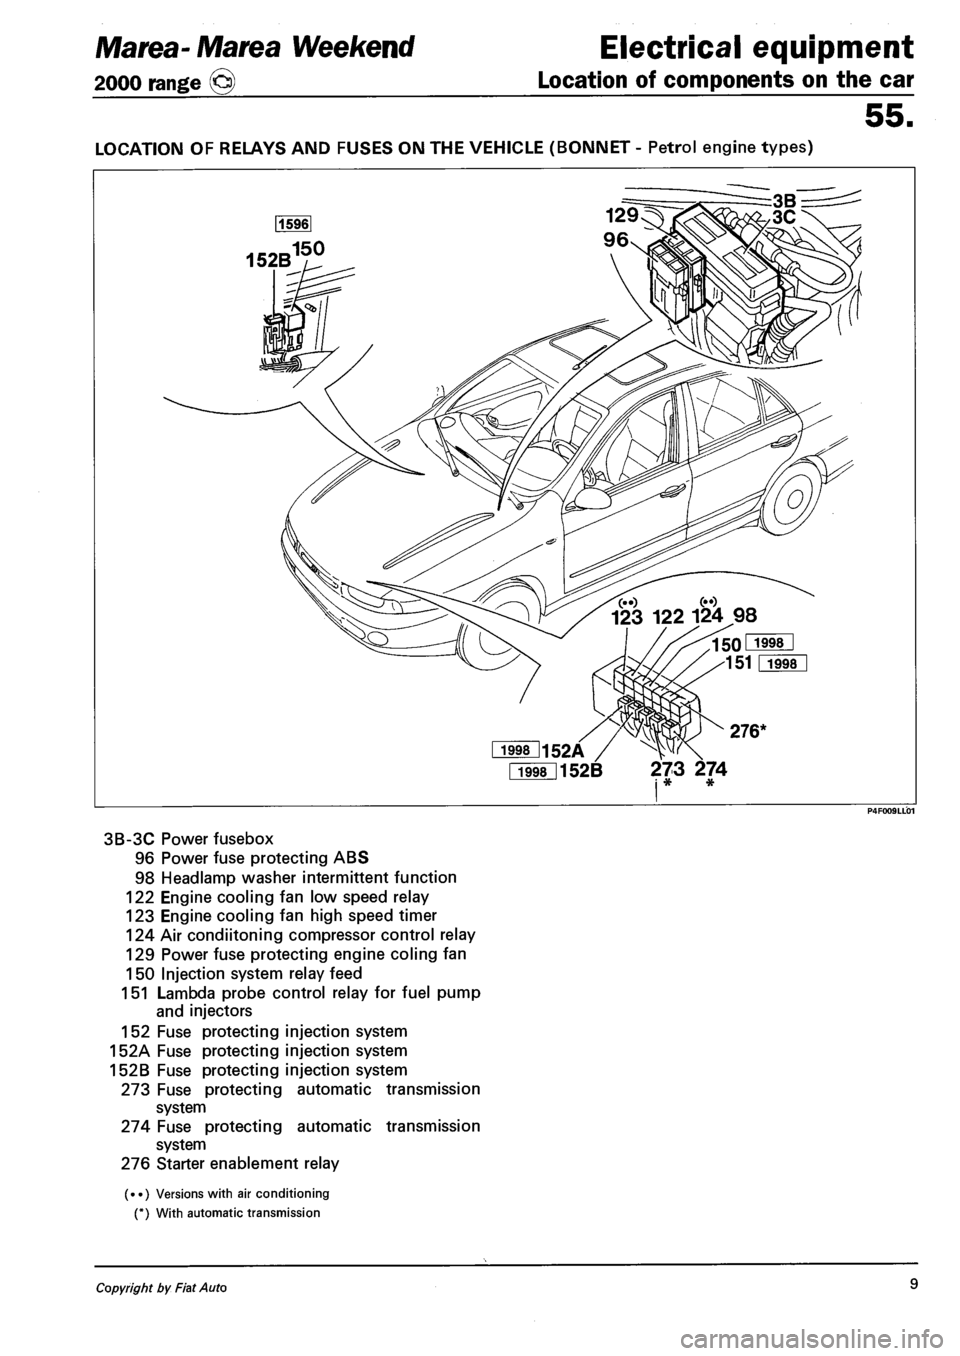 FIAT MAREA 2000 1.G Workshop Manual Marea-Marea Weekend Electrical equipment 
2000 range (§) Location of components on the car 
55. 
LOCATION OF RELAYS AND FUSES ON THE VEHICLE (BONNET - Petrol engine types) 
Fi998l152B 273 274 i * * 
